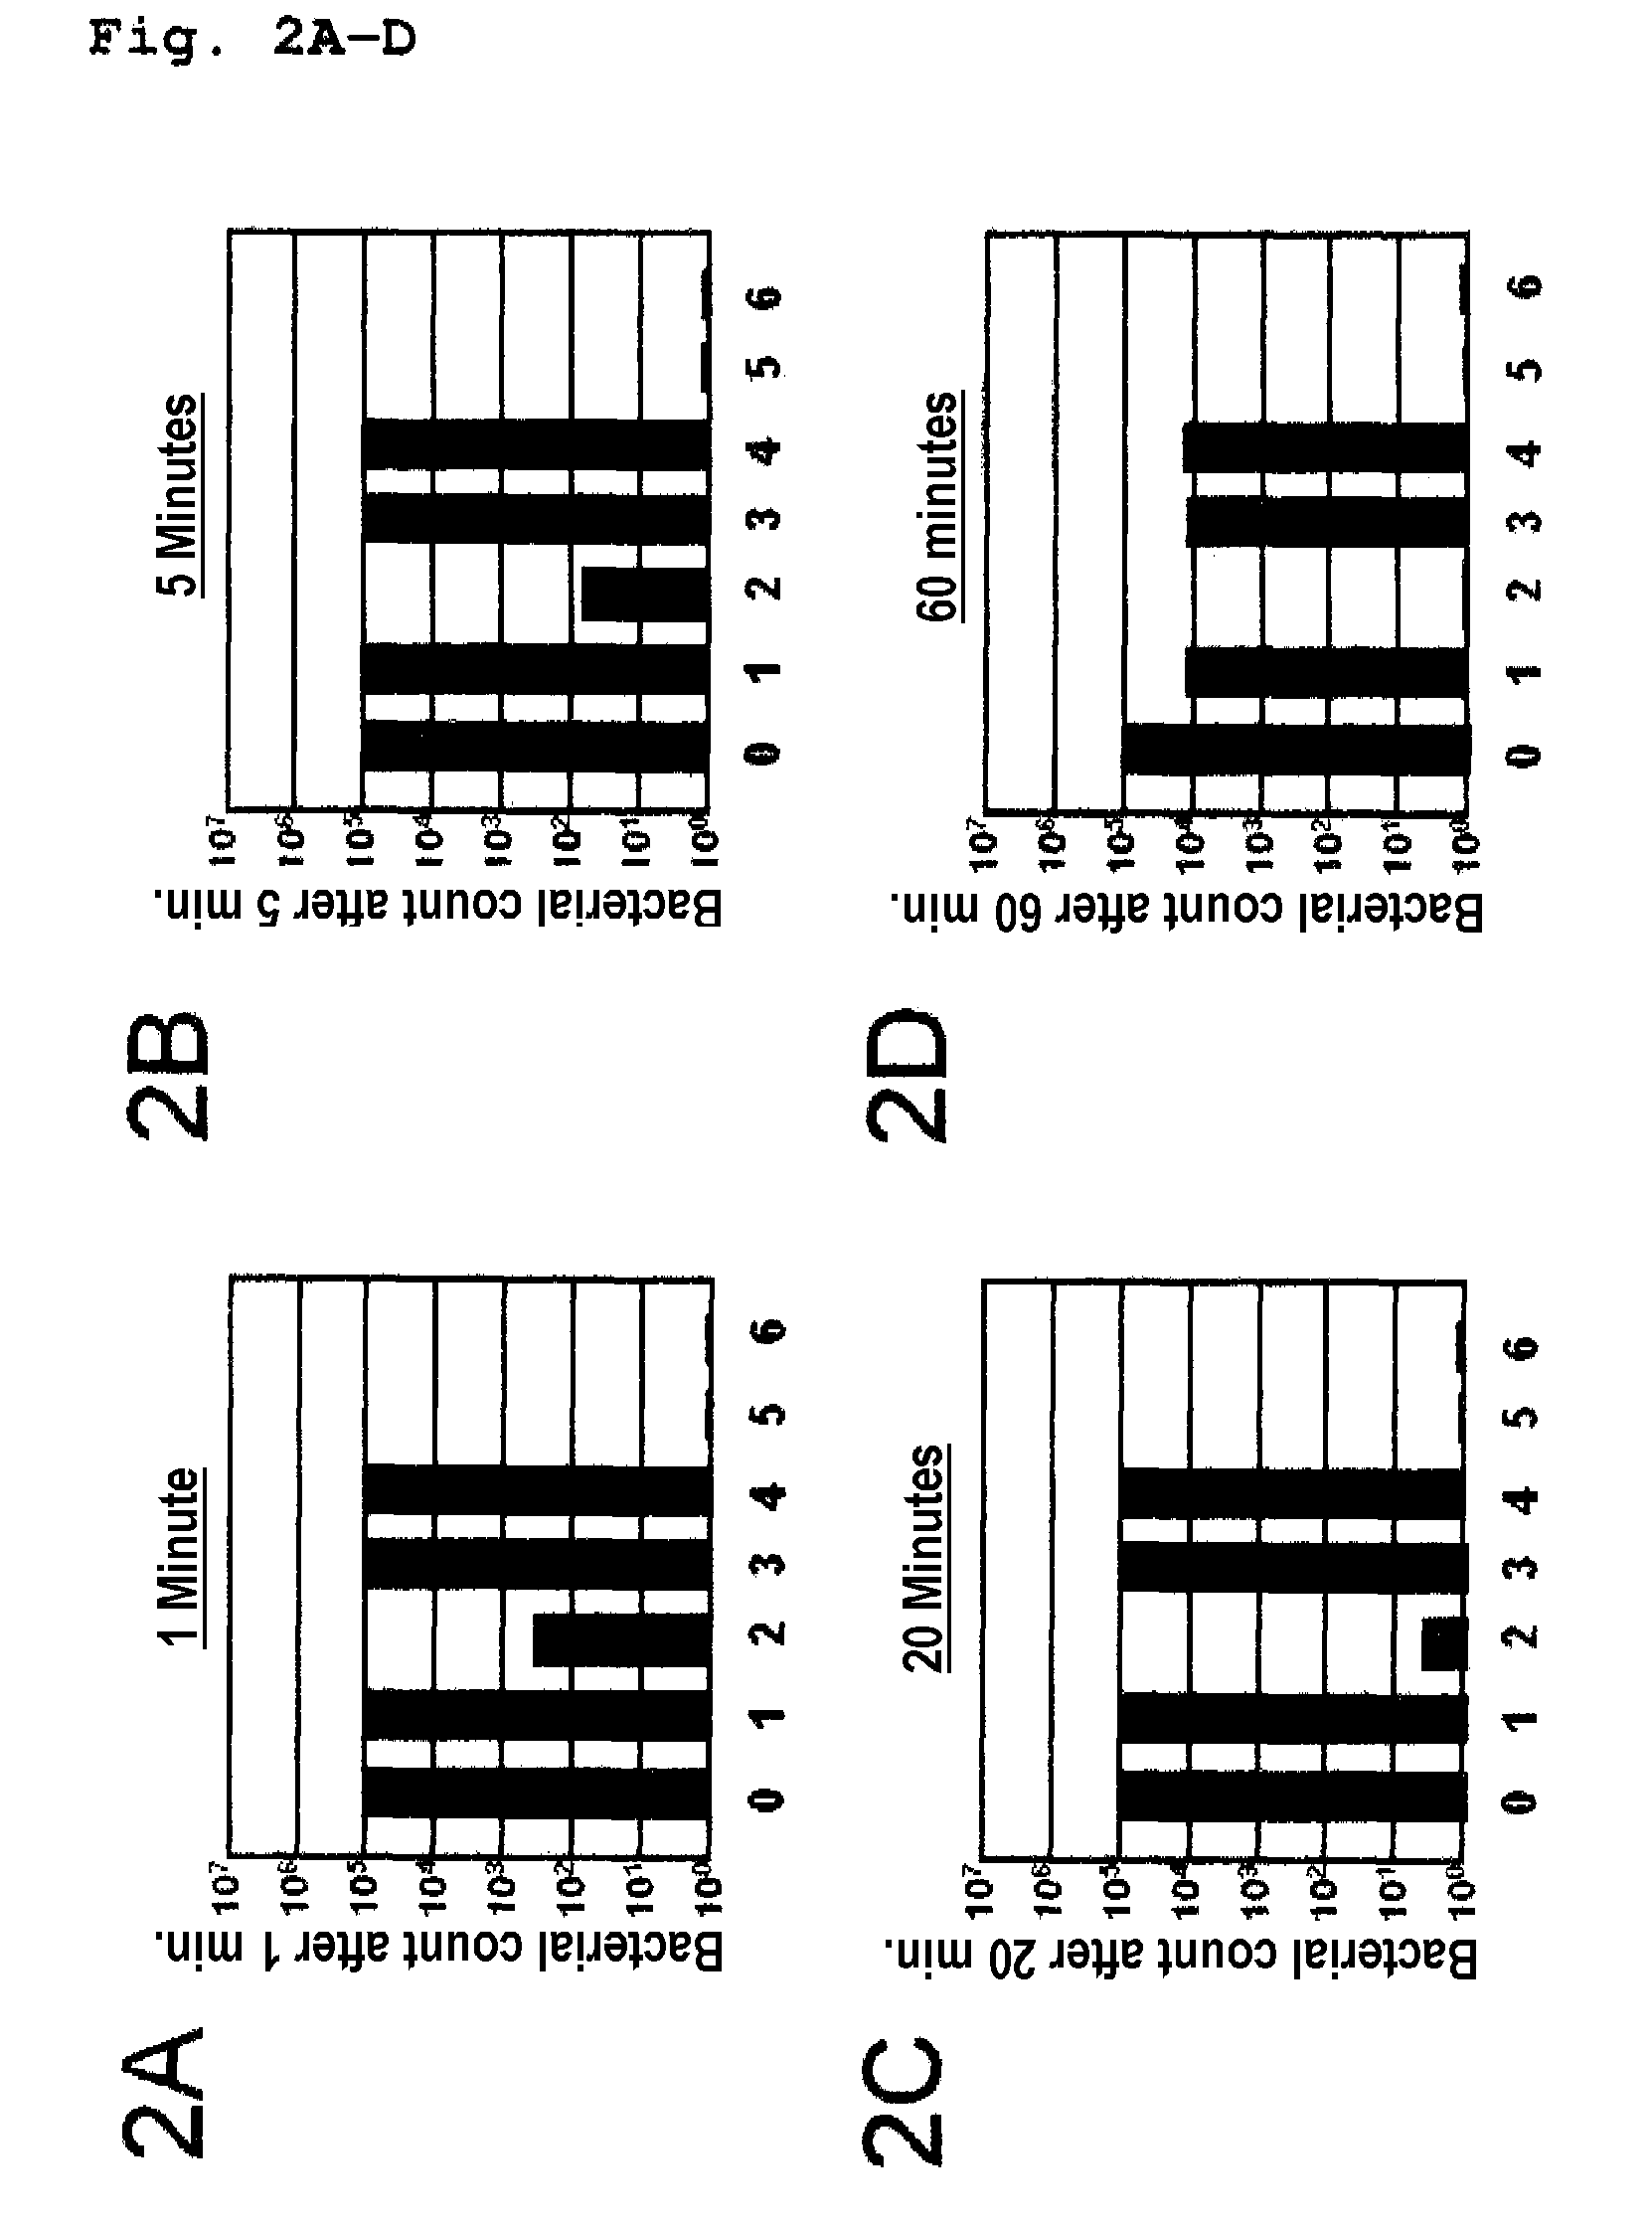 Bioactive, ruthenium-containing coating and device